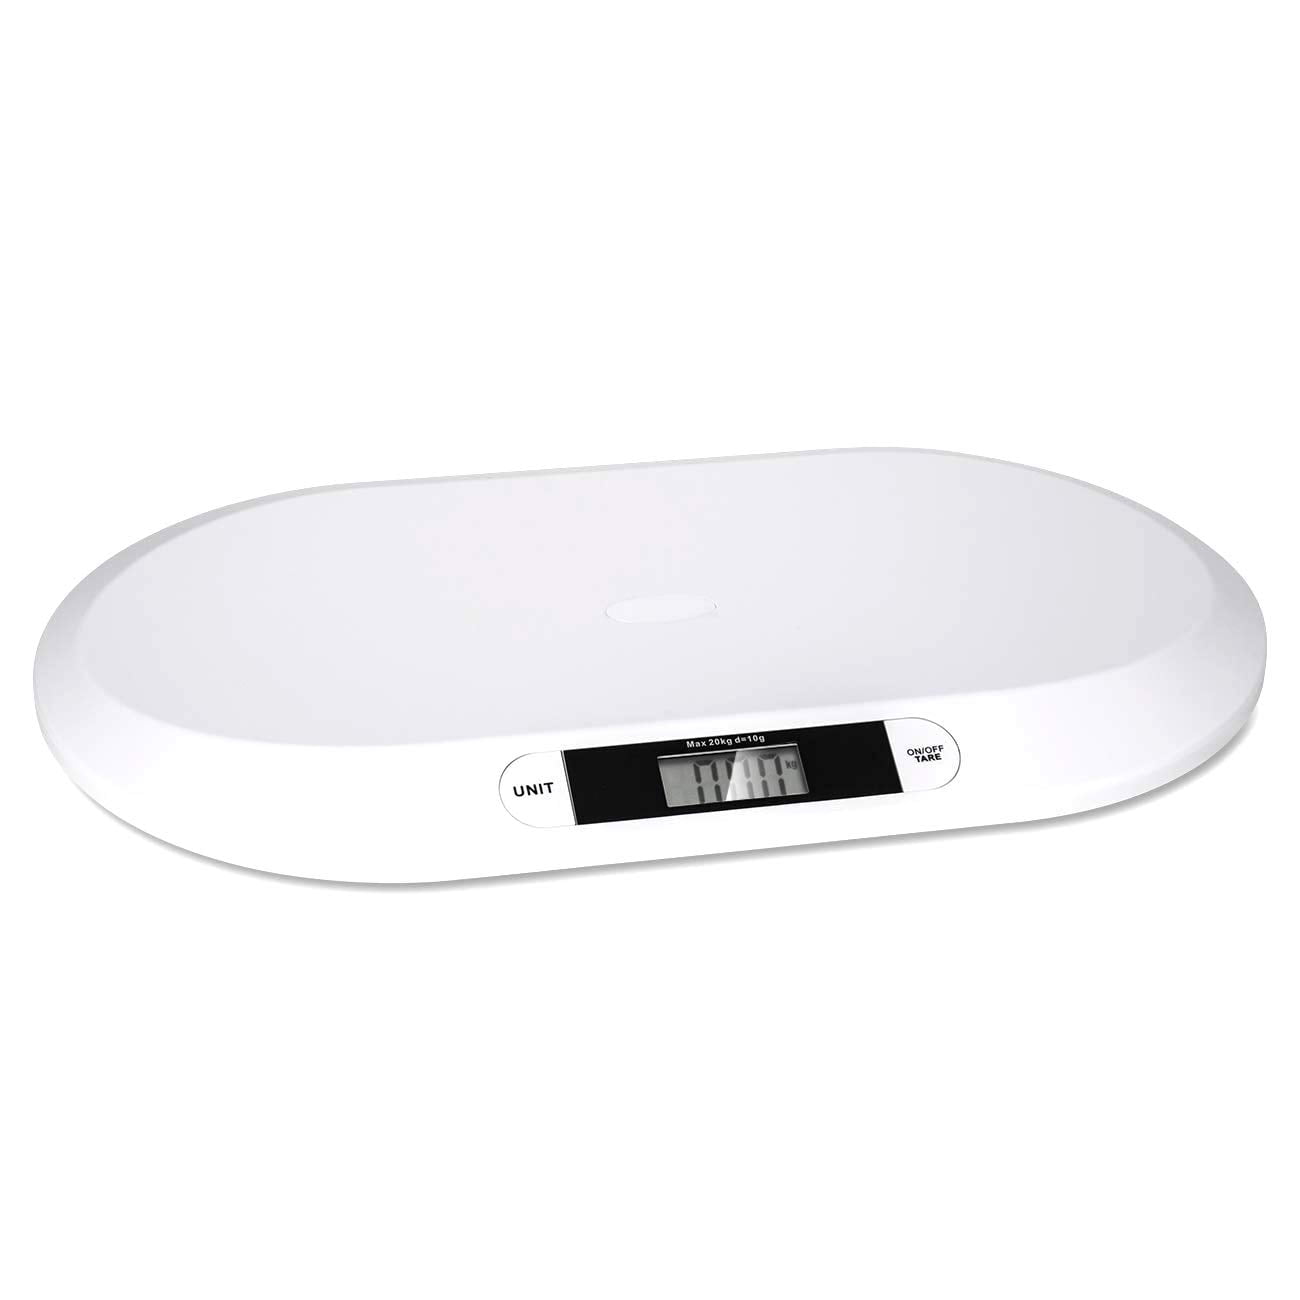 Multifunctional Newborn pet Scale,whelping Scale, Accuracy ± 0.035 oz,  Maximum 15 kg / 33.06 lbs, Automatic Hold, Integrated Design Without